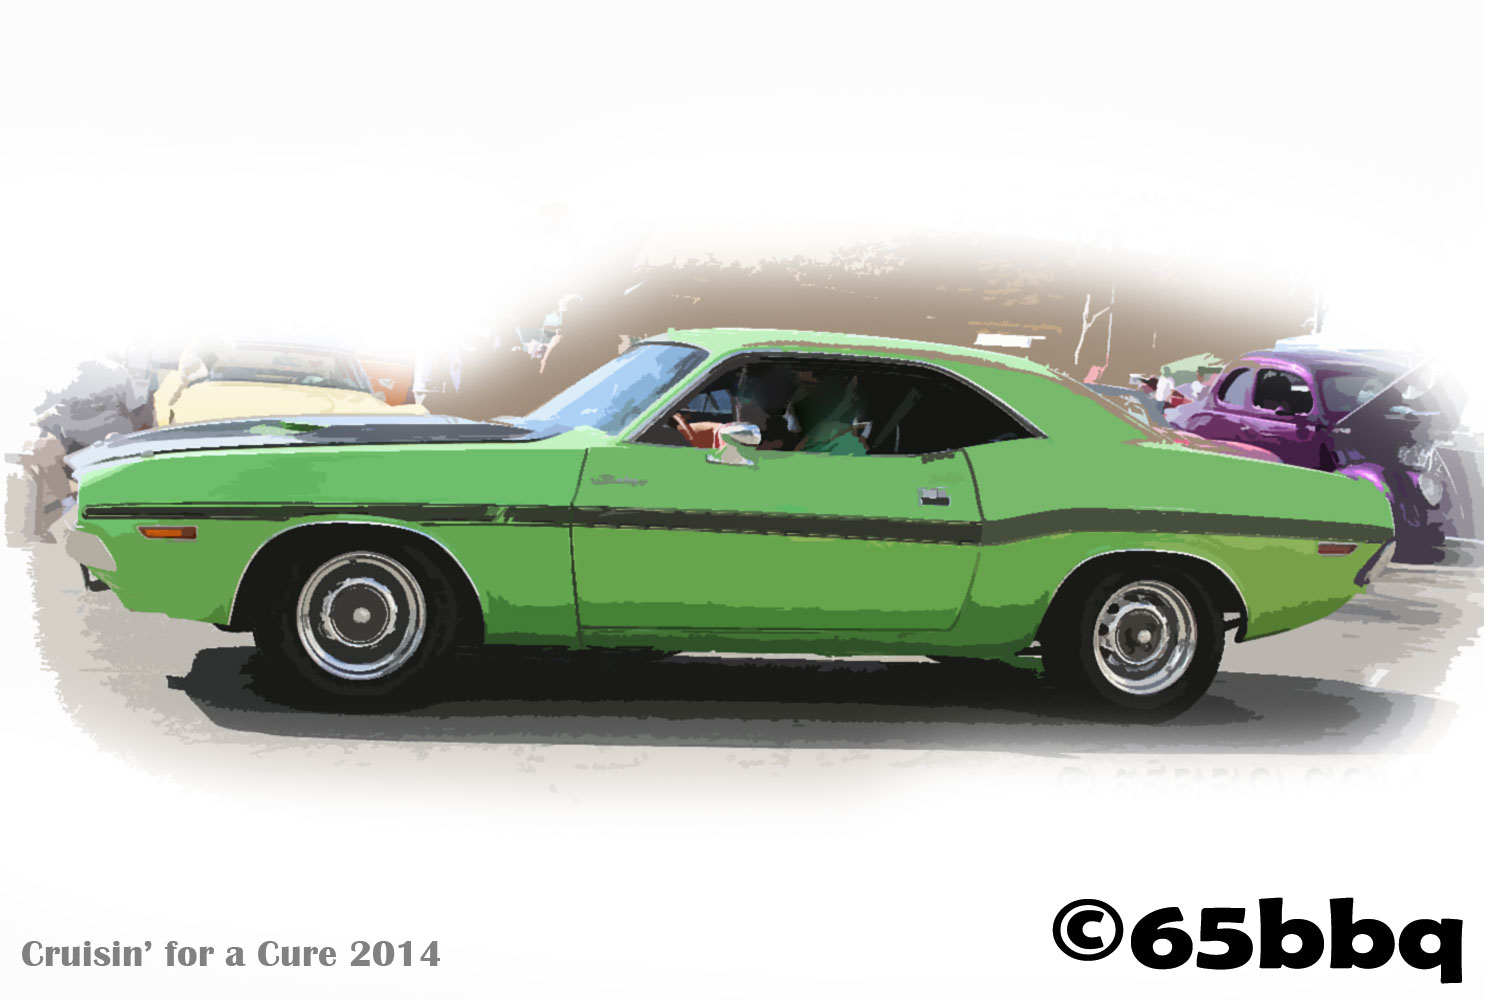 cruisin-for-a-cure-2014-the-ranchero-and-the-blue-q-stange.jpg